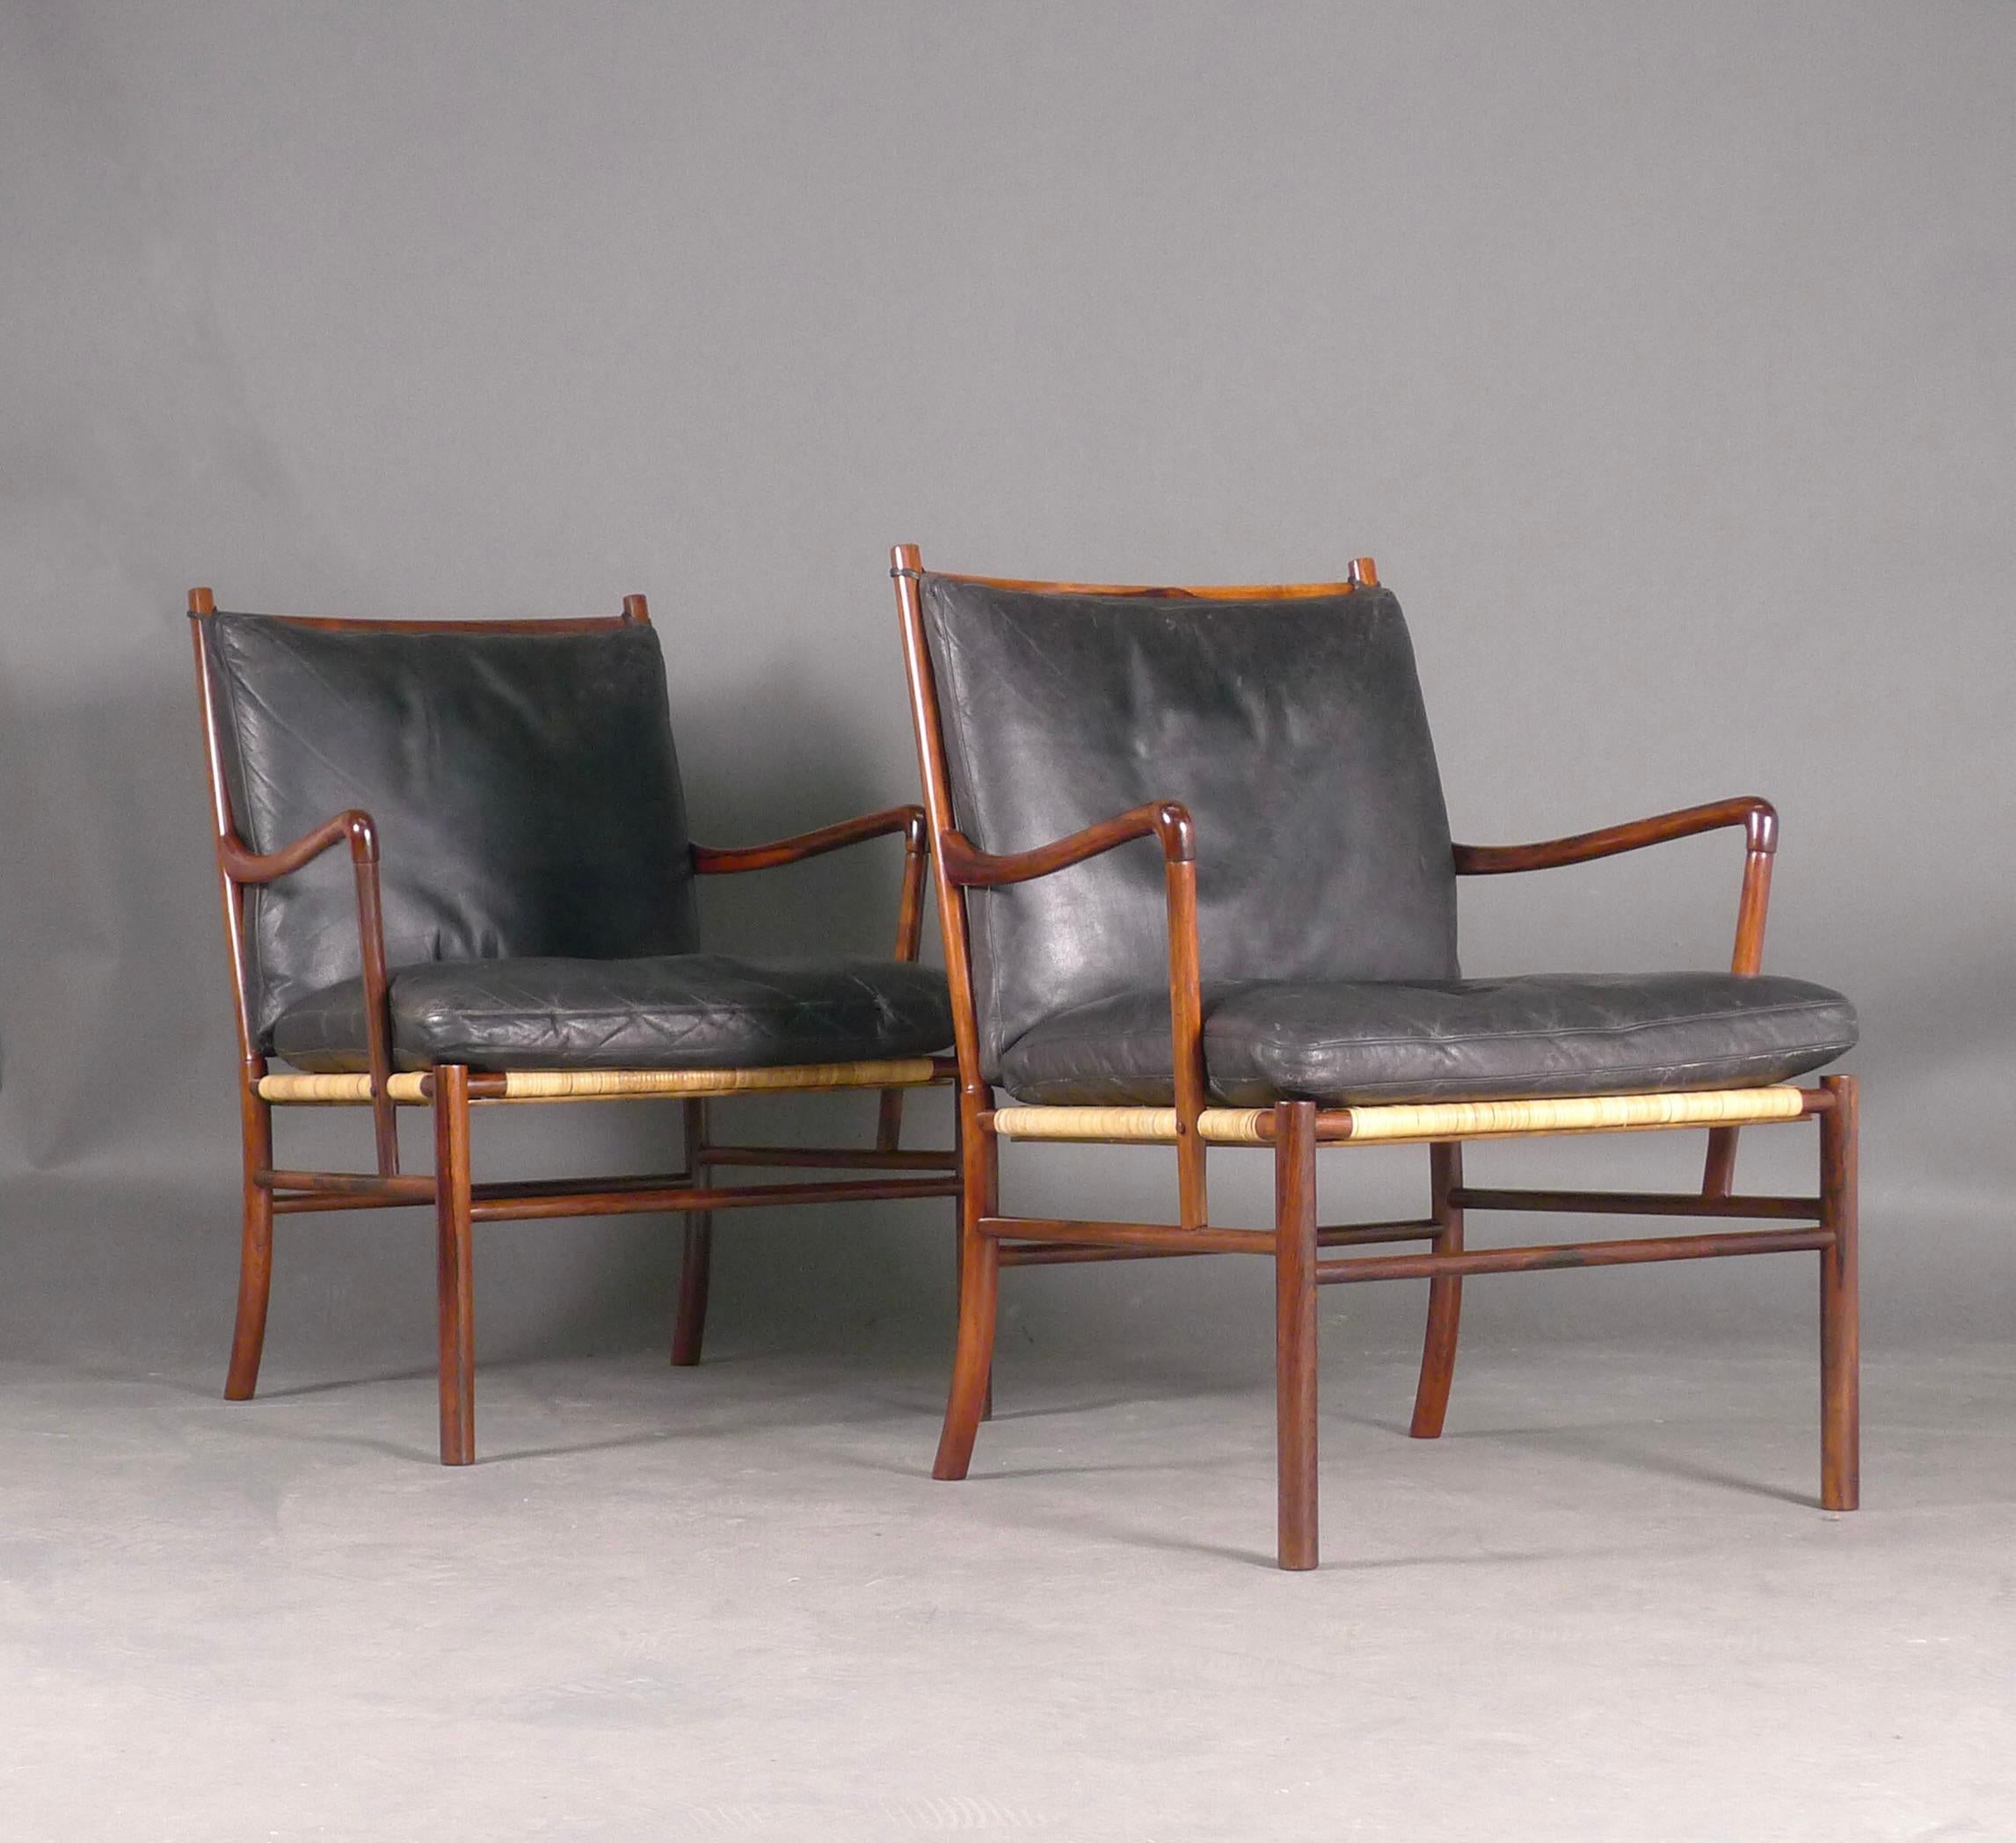 Leather Ole Wanscher, Pair of Colonial Chairs, model PJ149, 1st Edition 1949, Rosewood